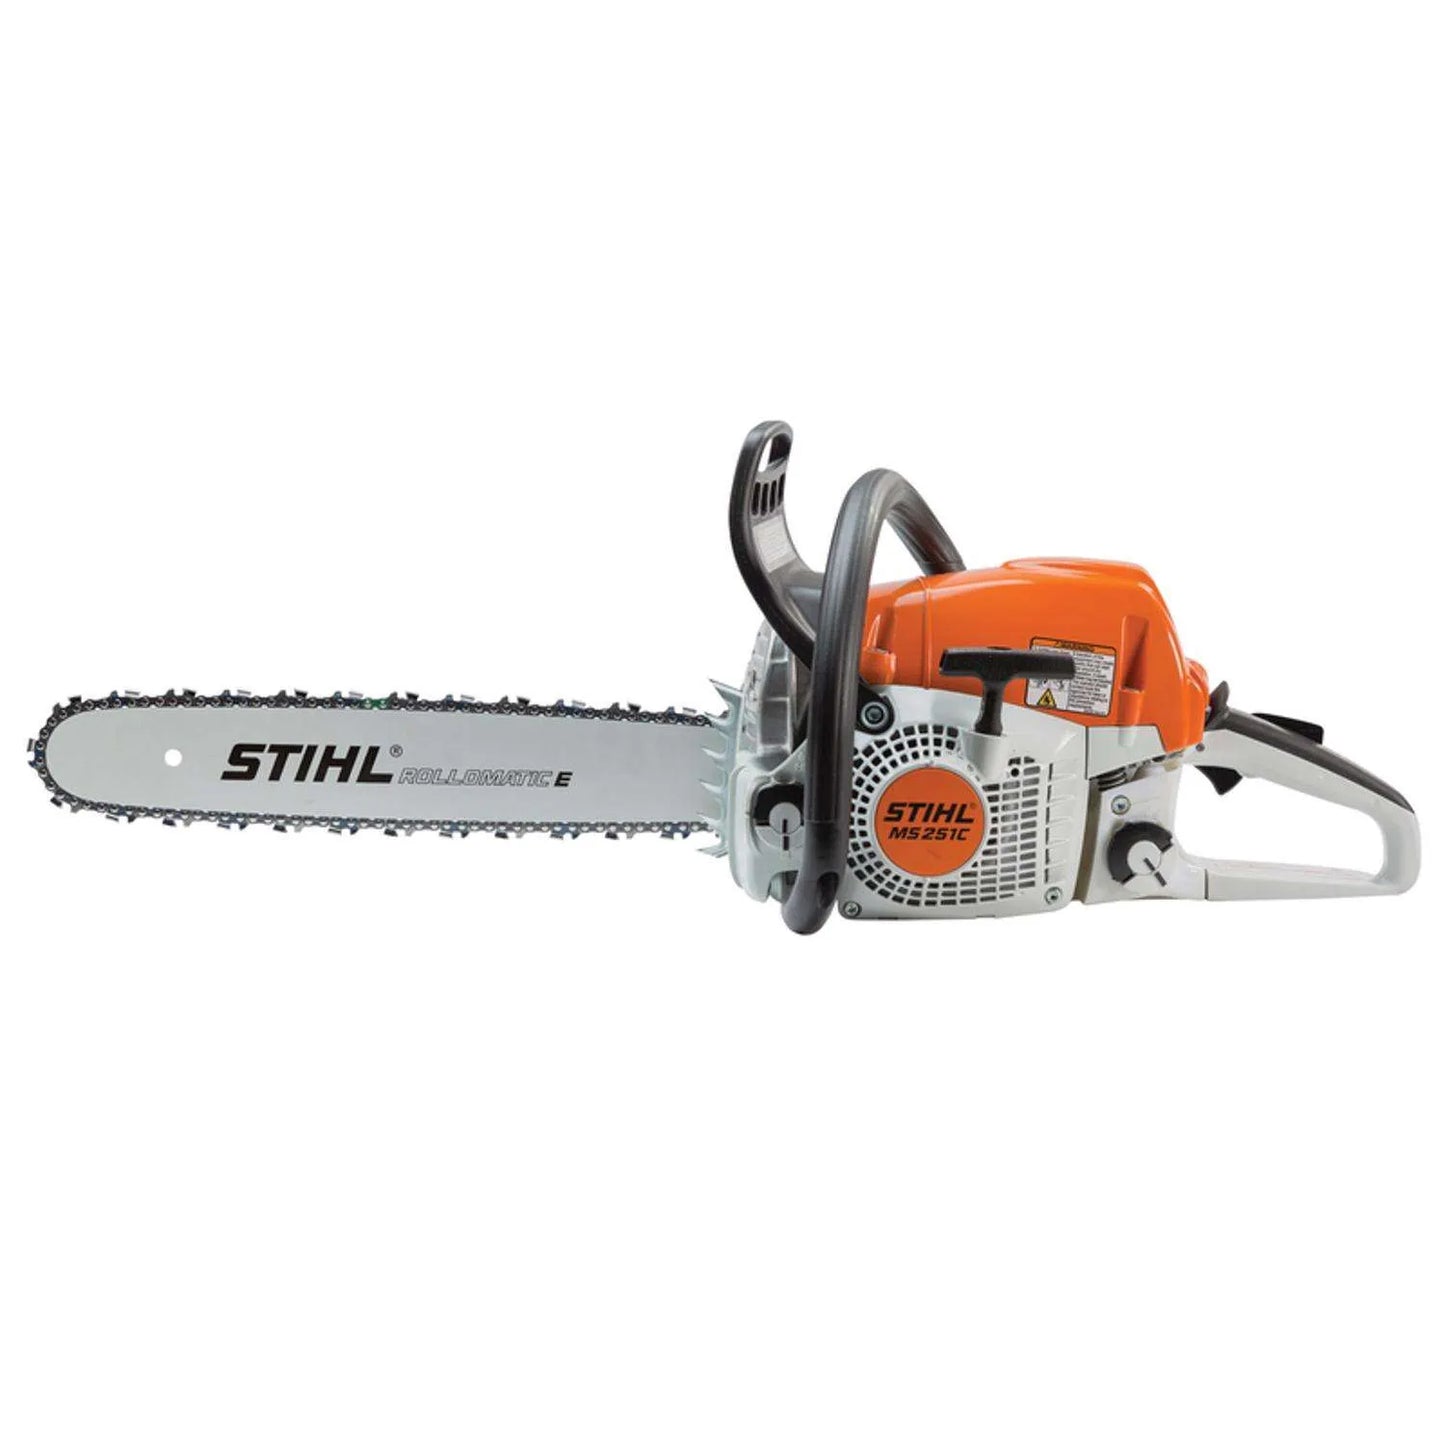 STIHL MS 251 C-BE 18 in. 45.6 cc Gas Chainsaw